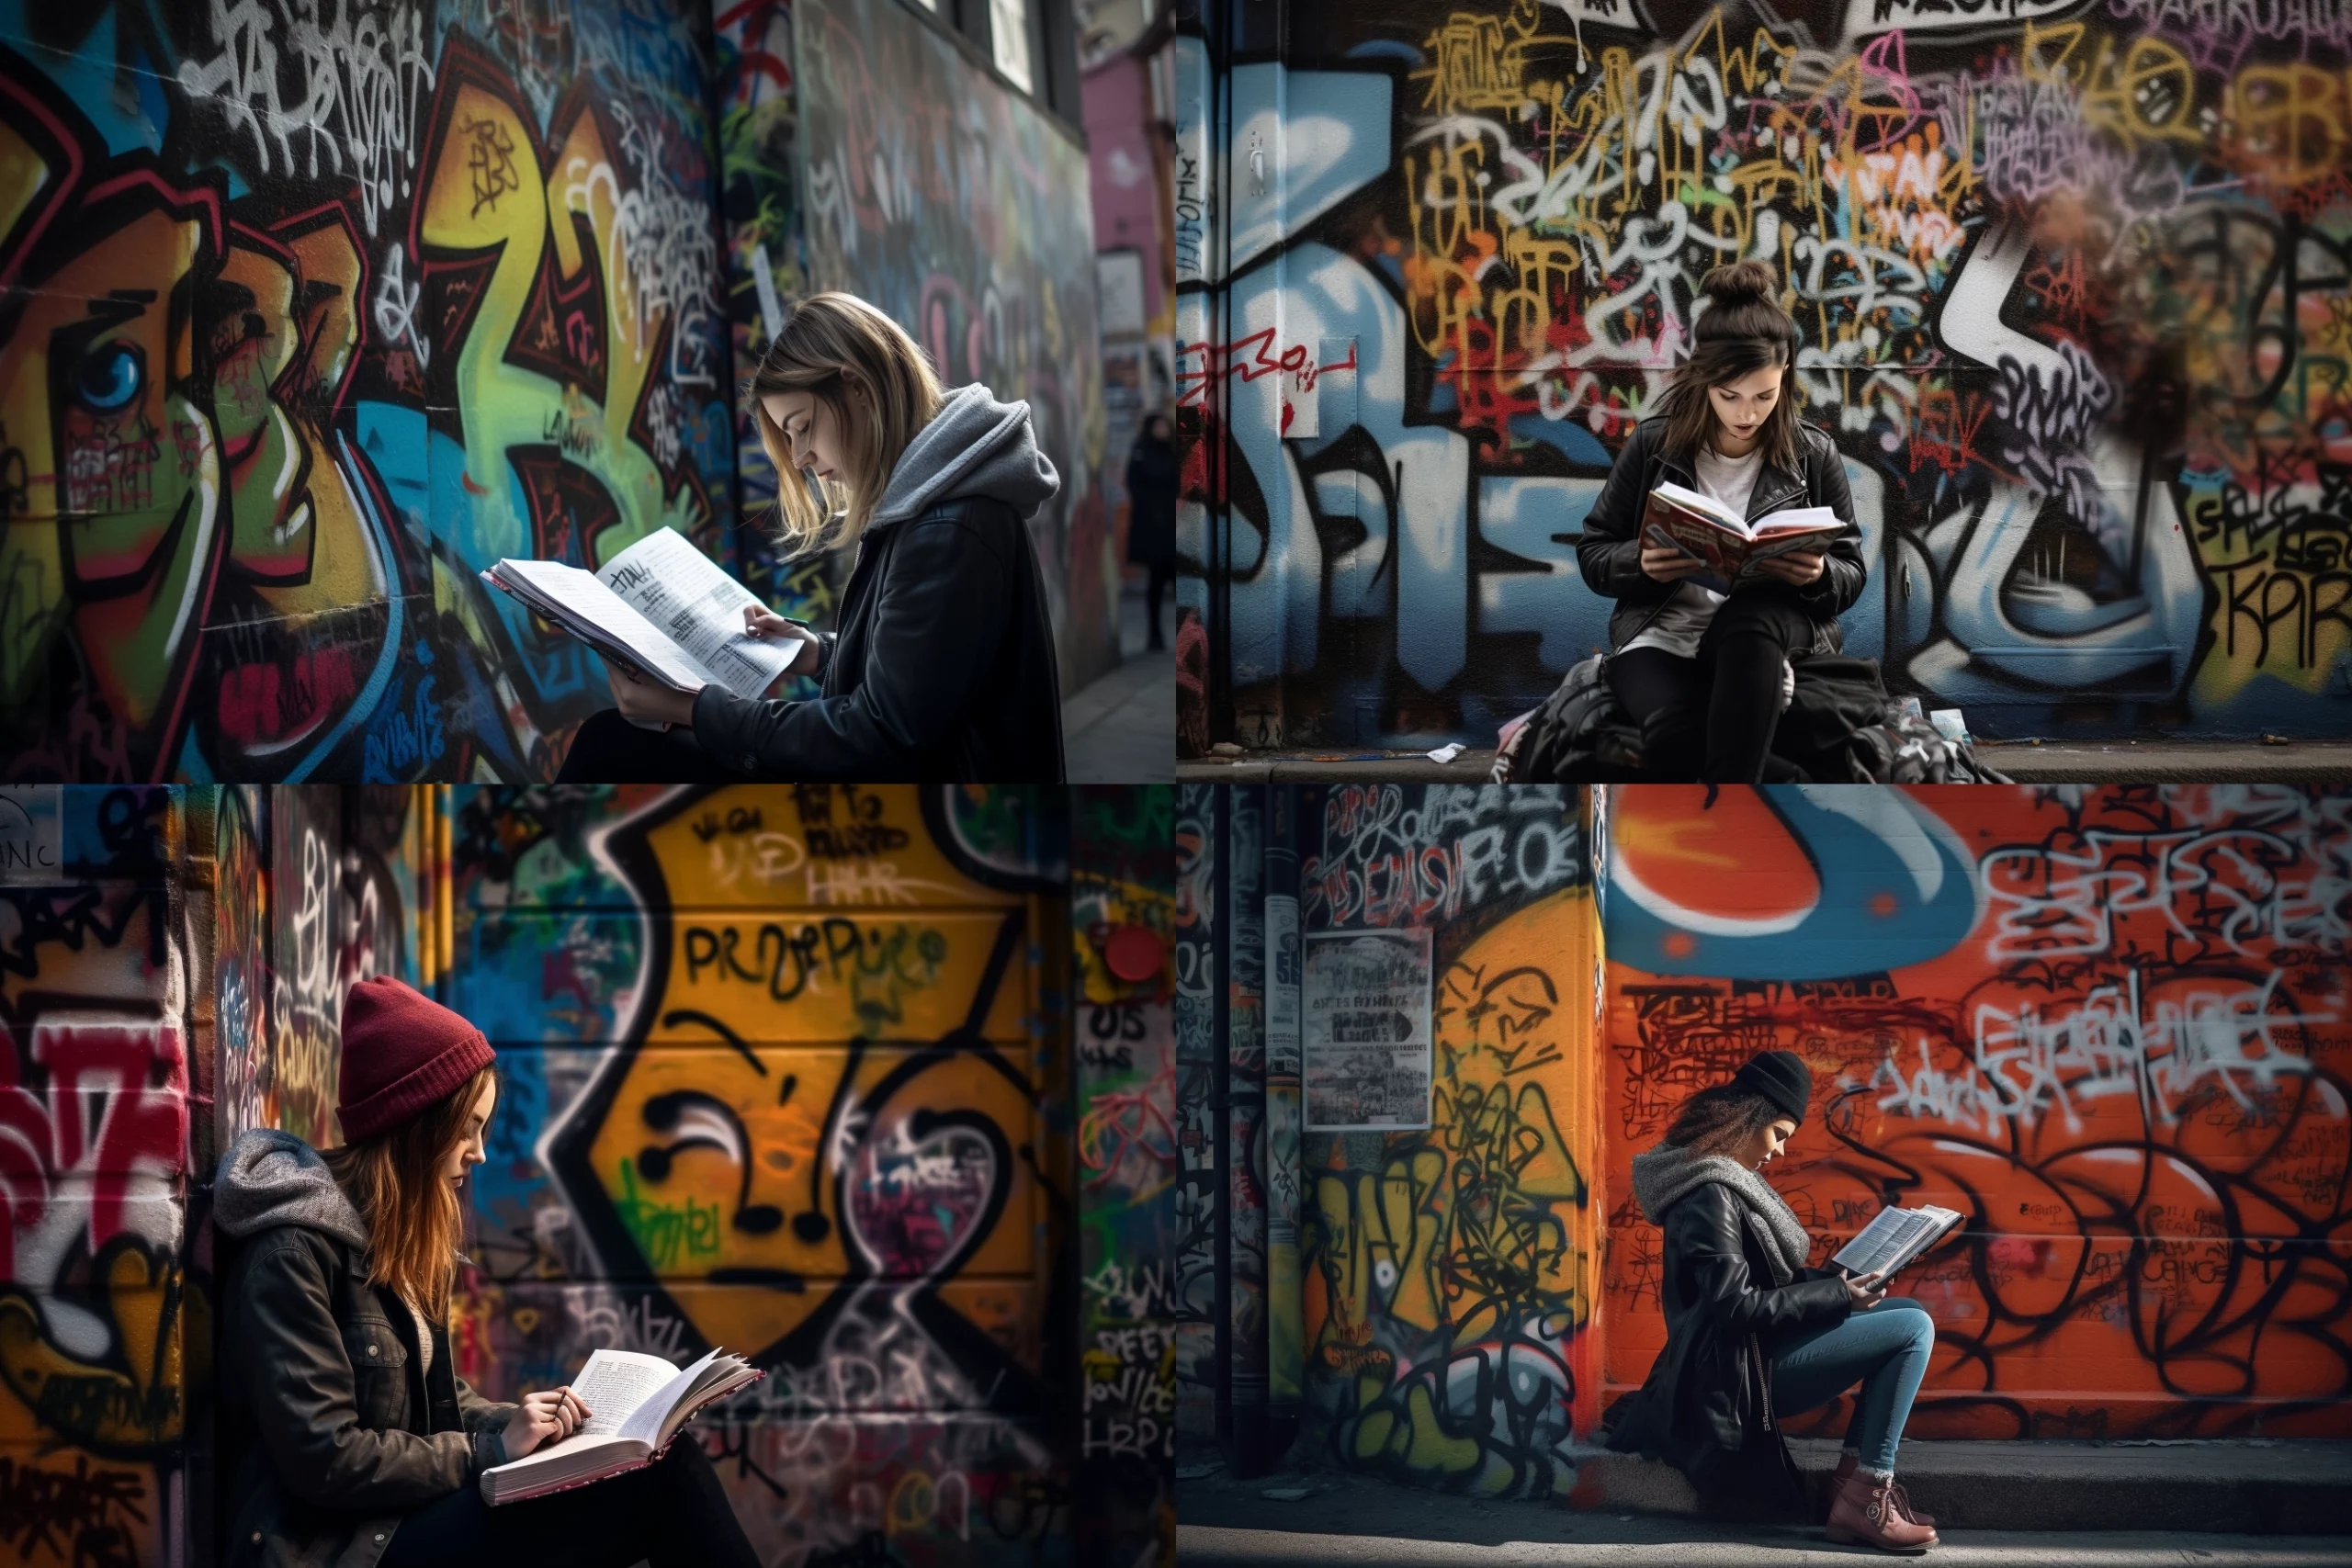 A photograph of a woman reading a book while leaning against a graffiti-covered wall in a bustling urban street during late afternoon, taken with a Fujifilm X100V with a 23mm f/2 lens